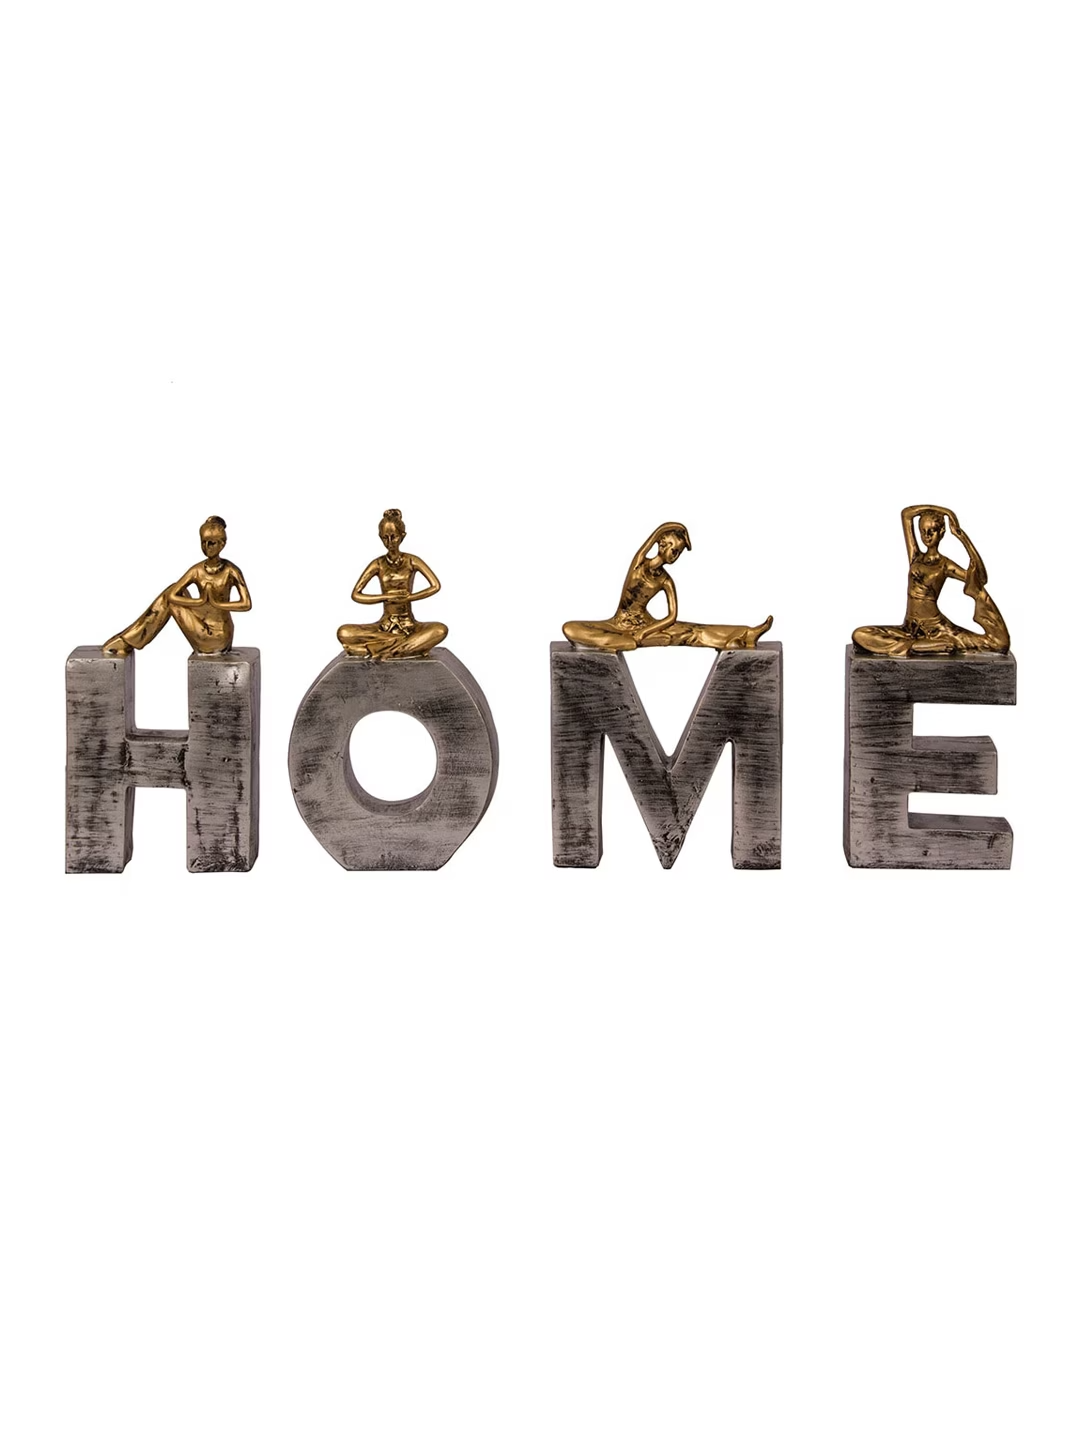 Gold & Silver-Toned Decorative Showpiece Home Sign Symbol With Attached Yoga Lady